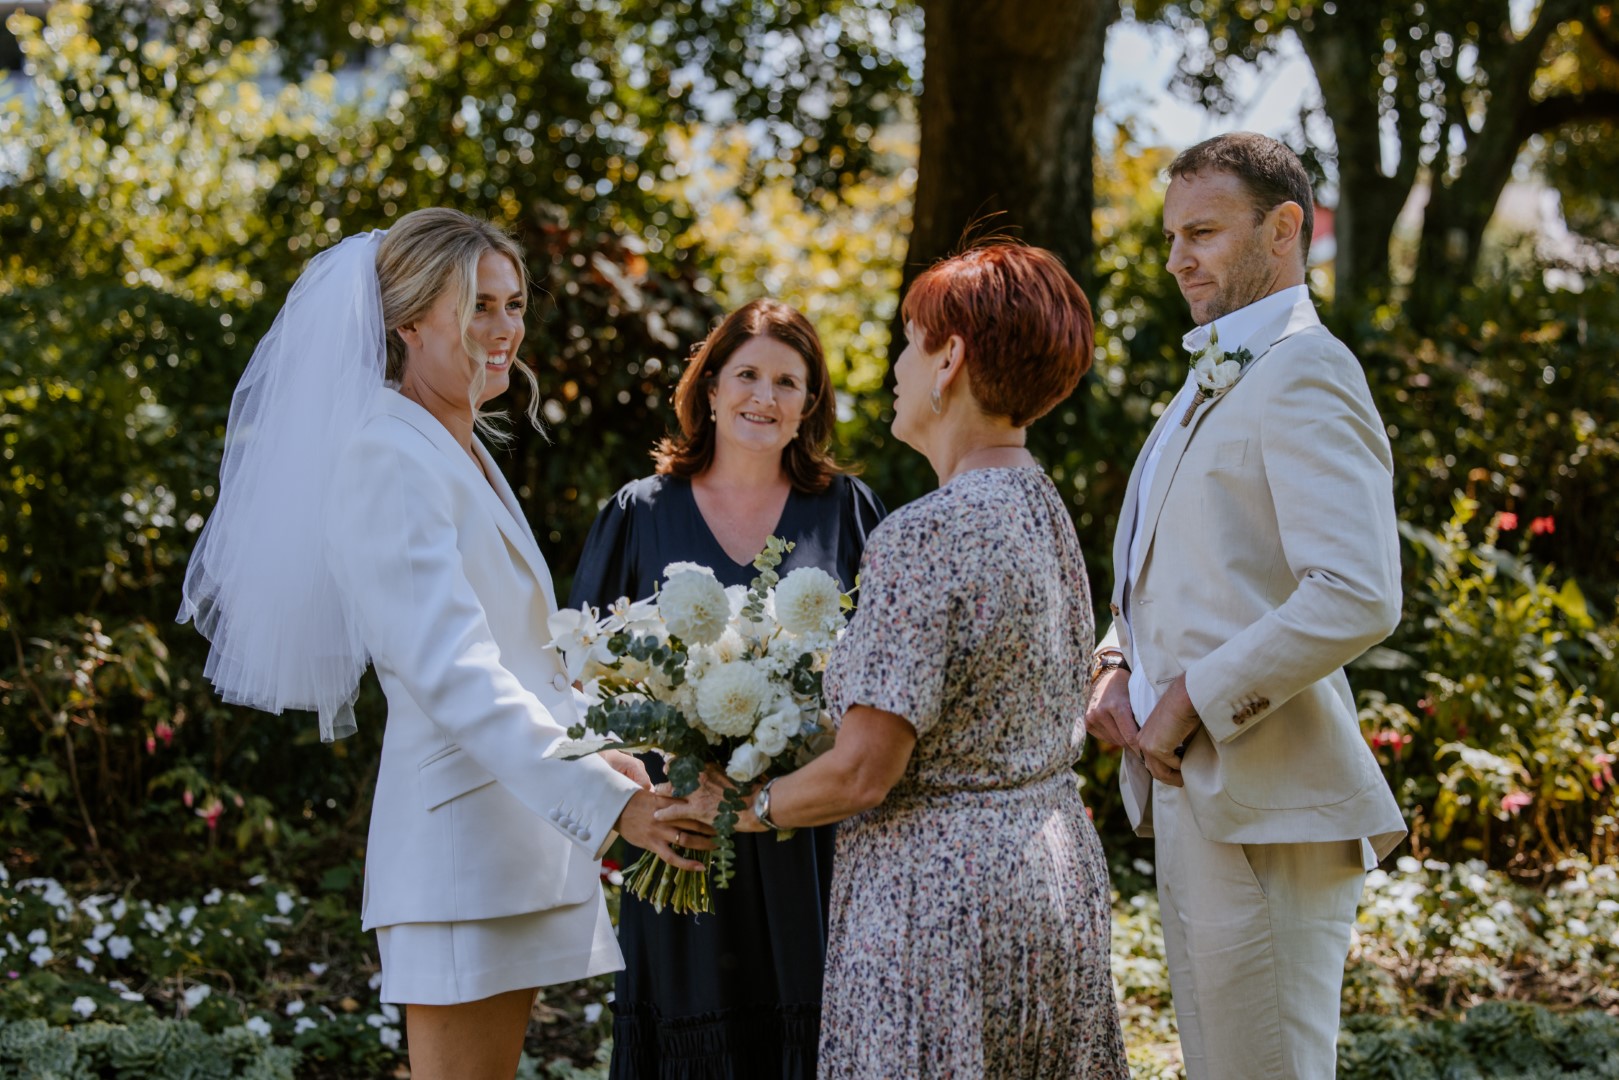 A bride wearing a white suit and skirt with a veil and groom wearing an offwhite suit, stand in a garden at a ceremony with a celebrant and a parent saying kind words to the bride.